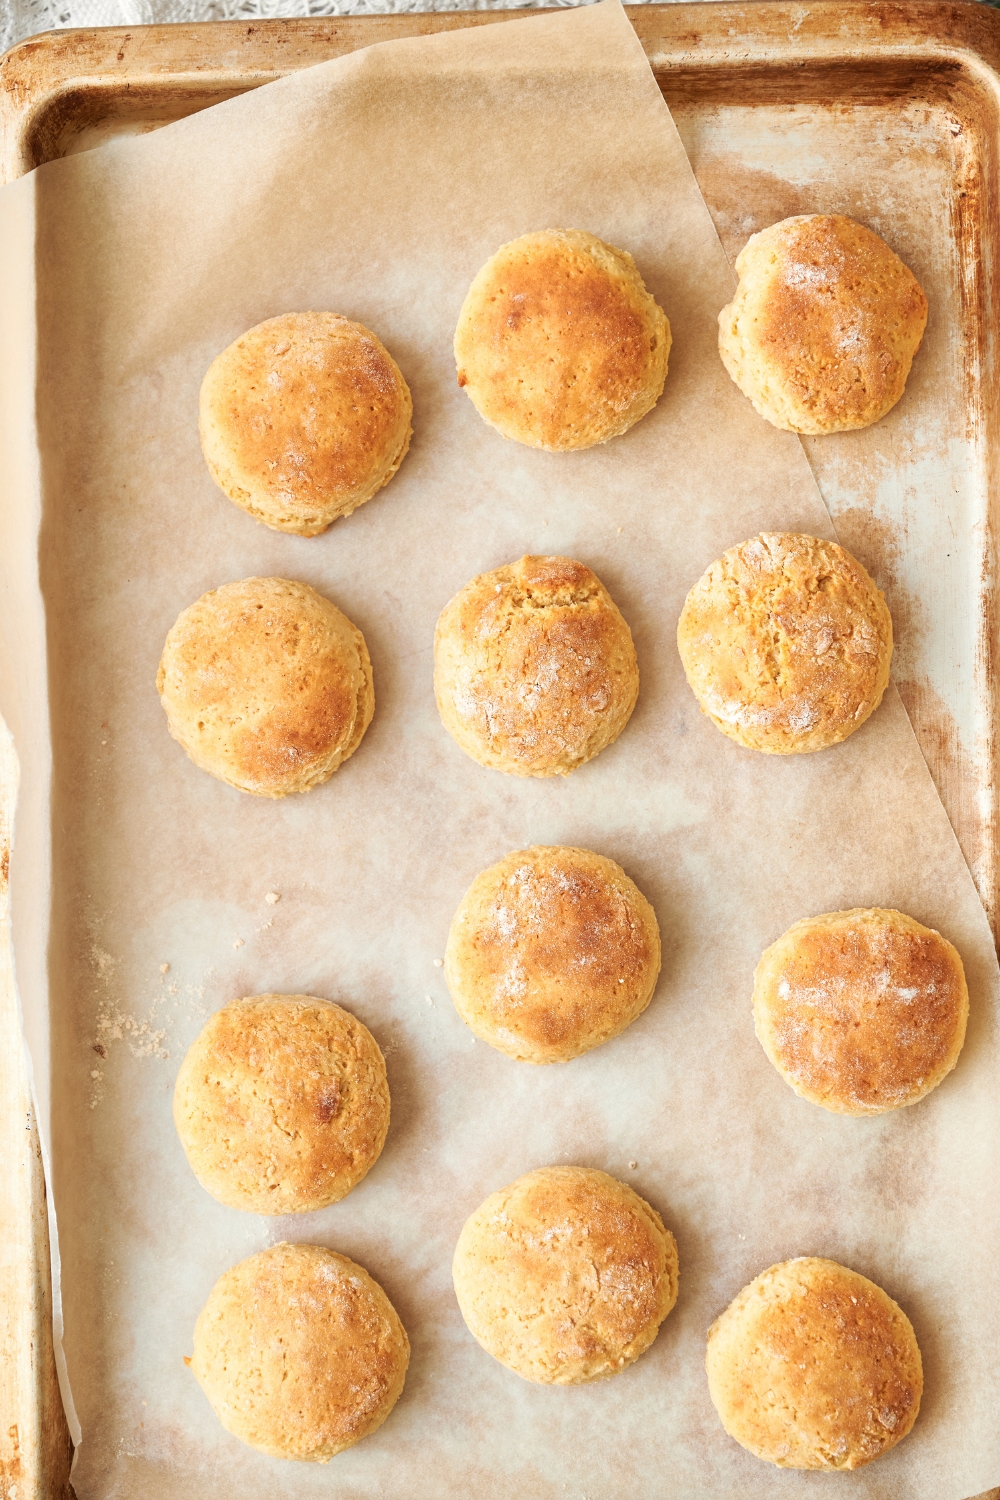 Twelve golden brown biscuits lined neatly on a parchment paper lined baking sheet.